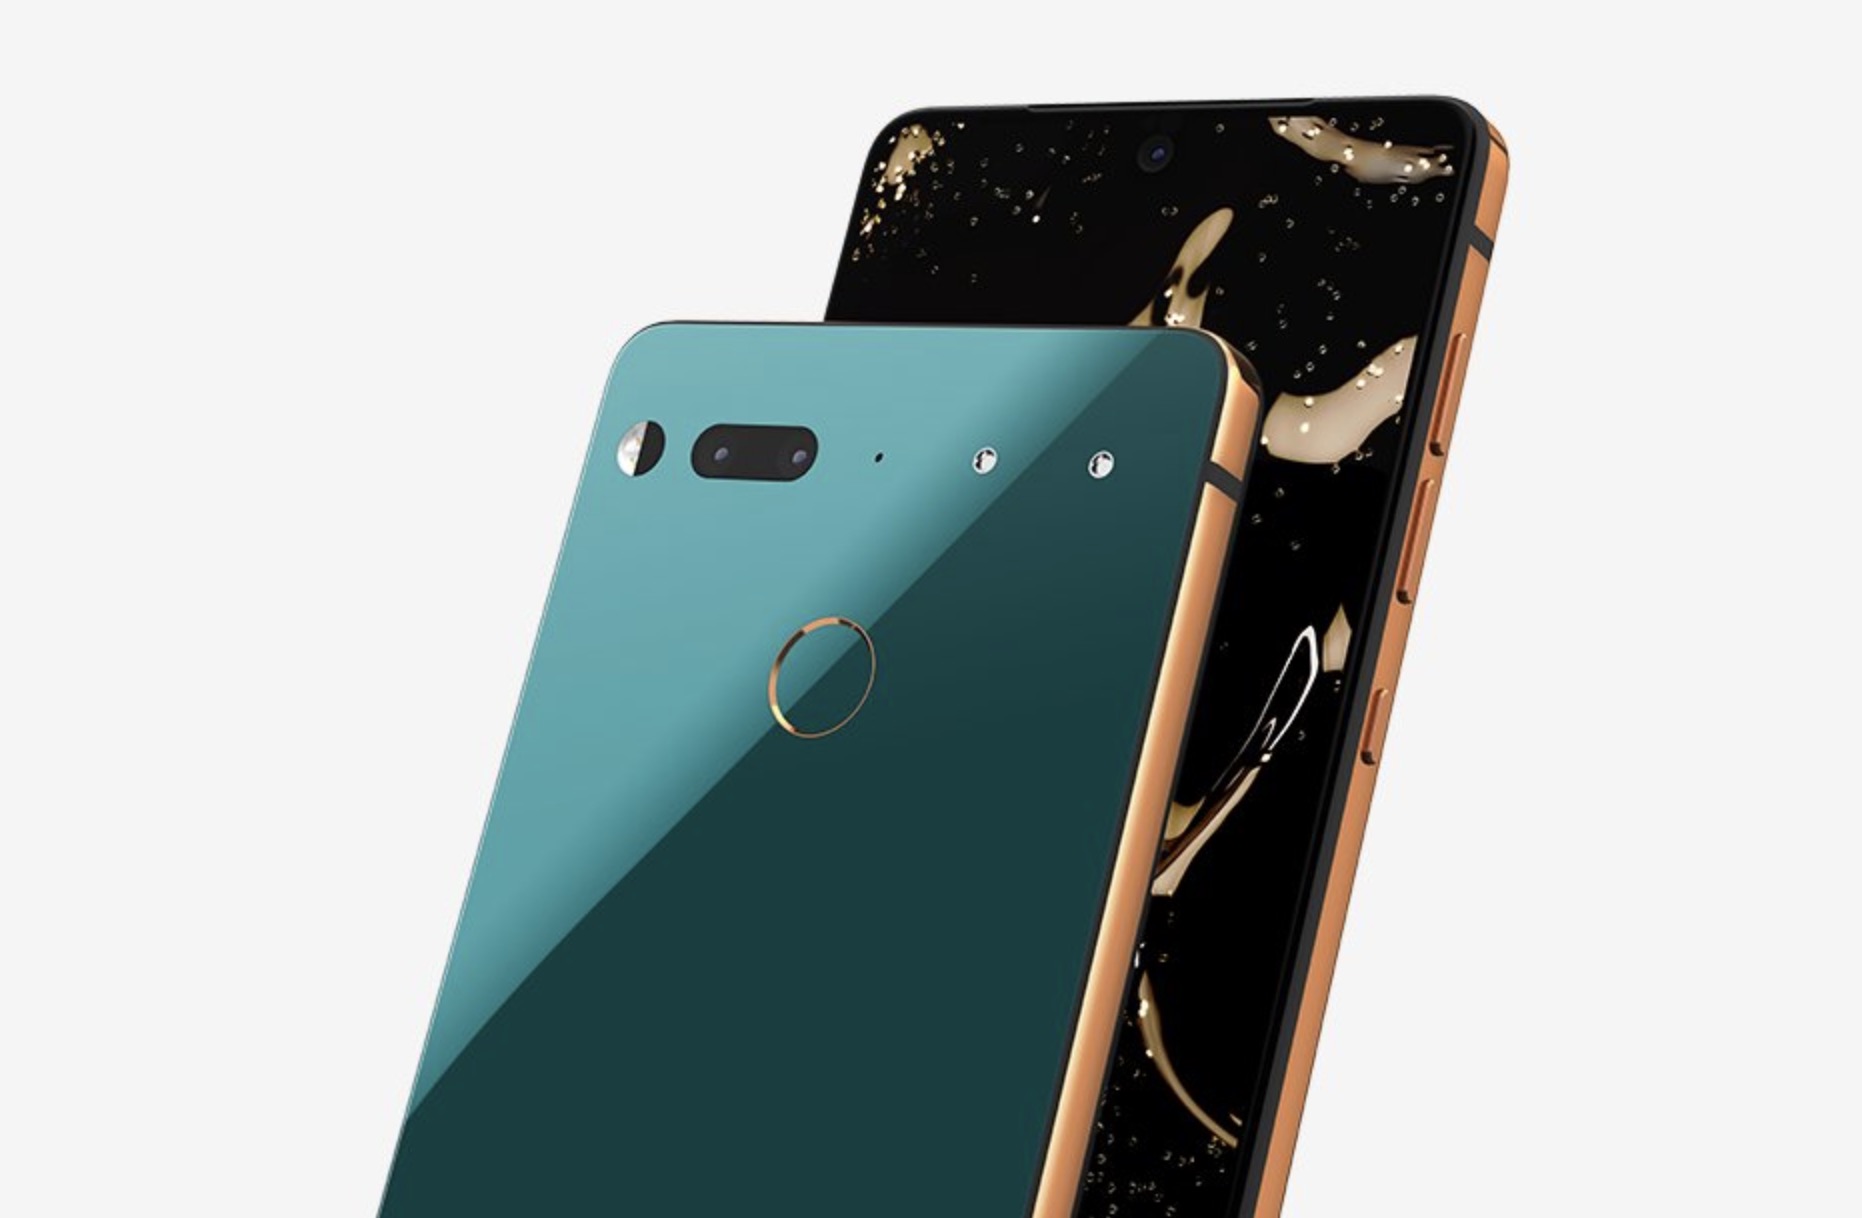 I Can’t Tell What Colour This Phone Is And Honestly It’s Driving Me Nuts